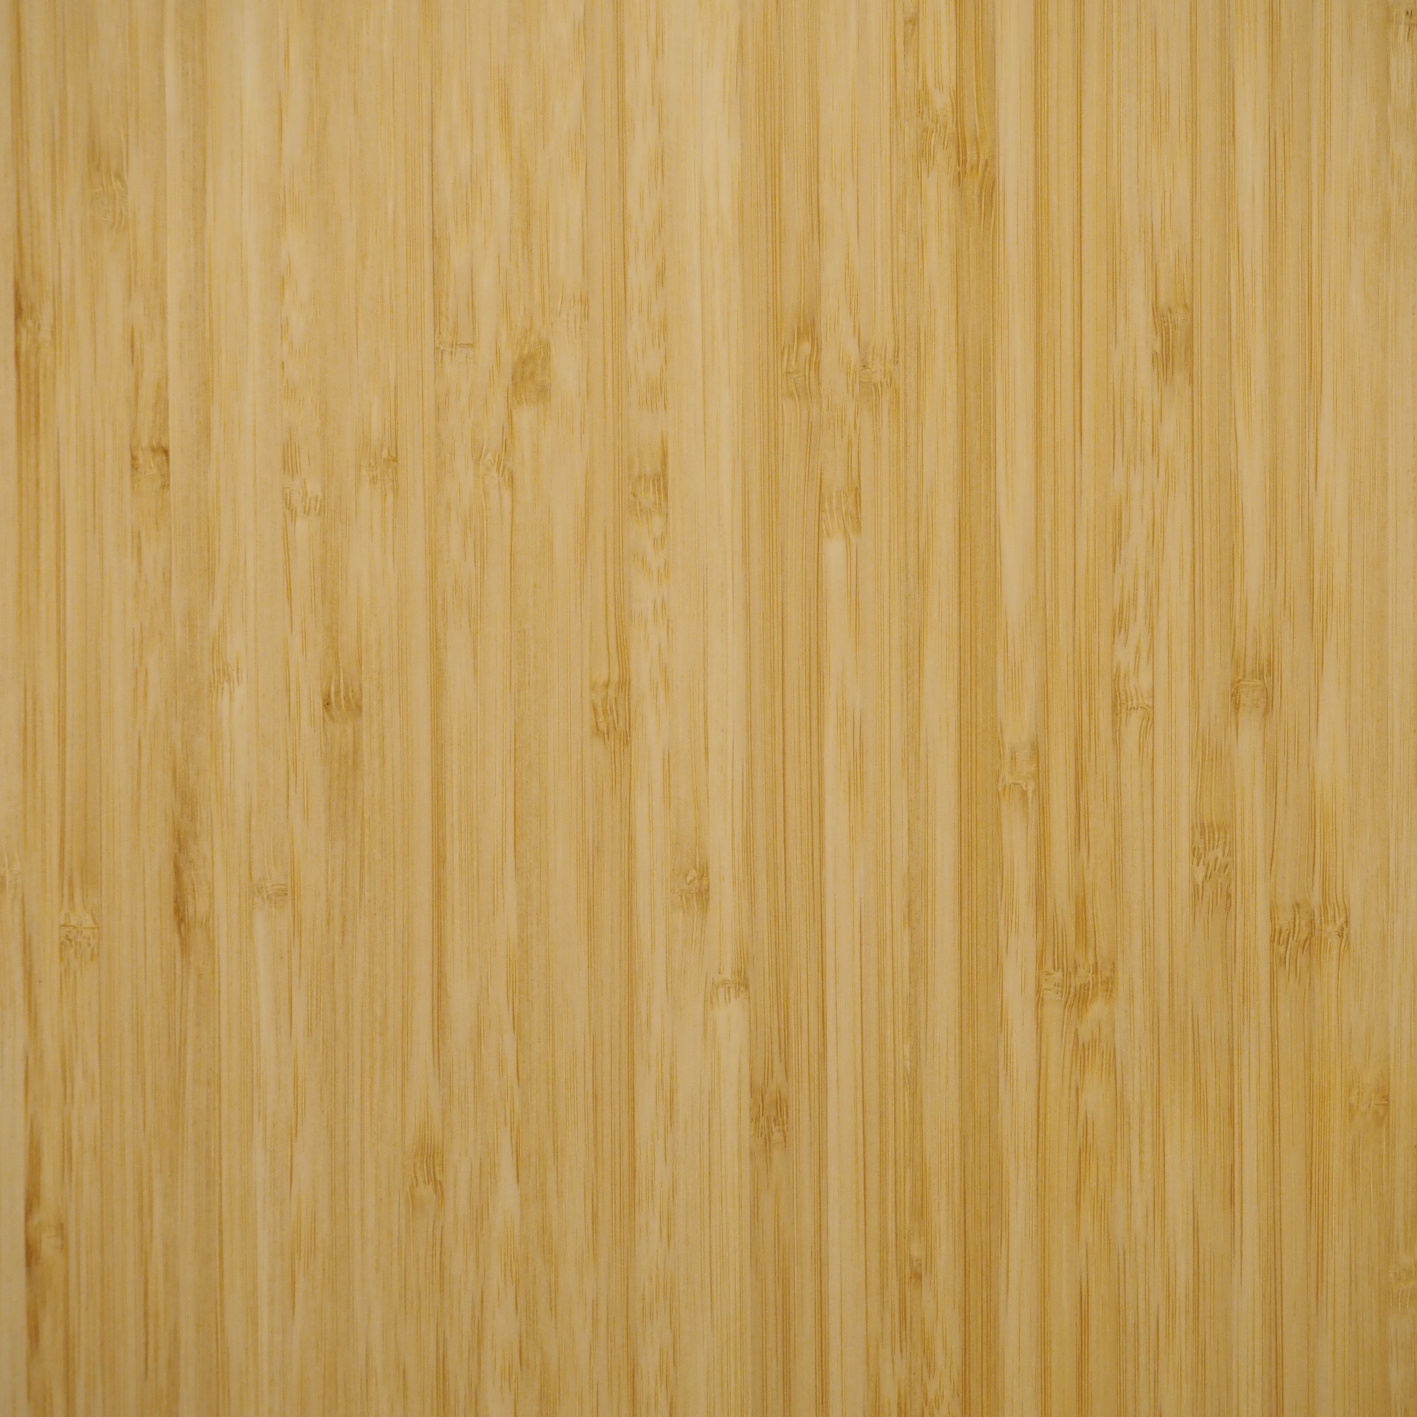 Board in cross laminated bamboo with cable holes (140 x 80 cm)